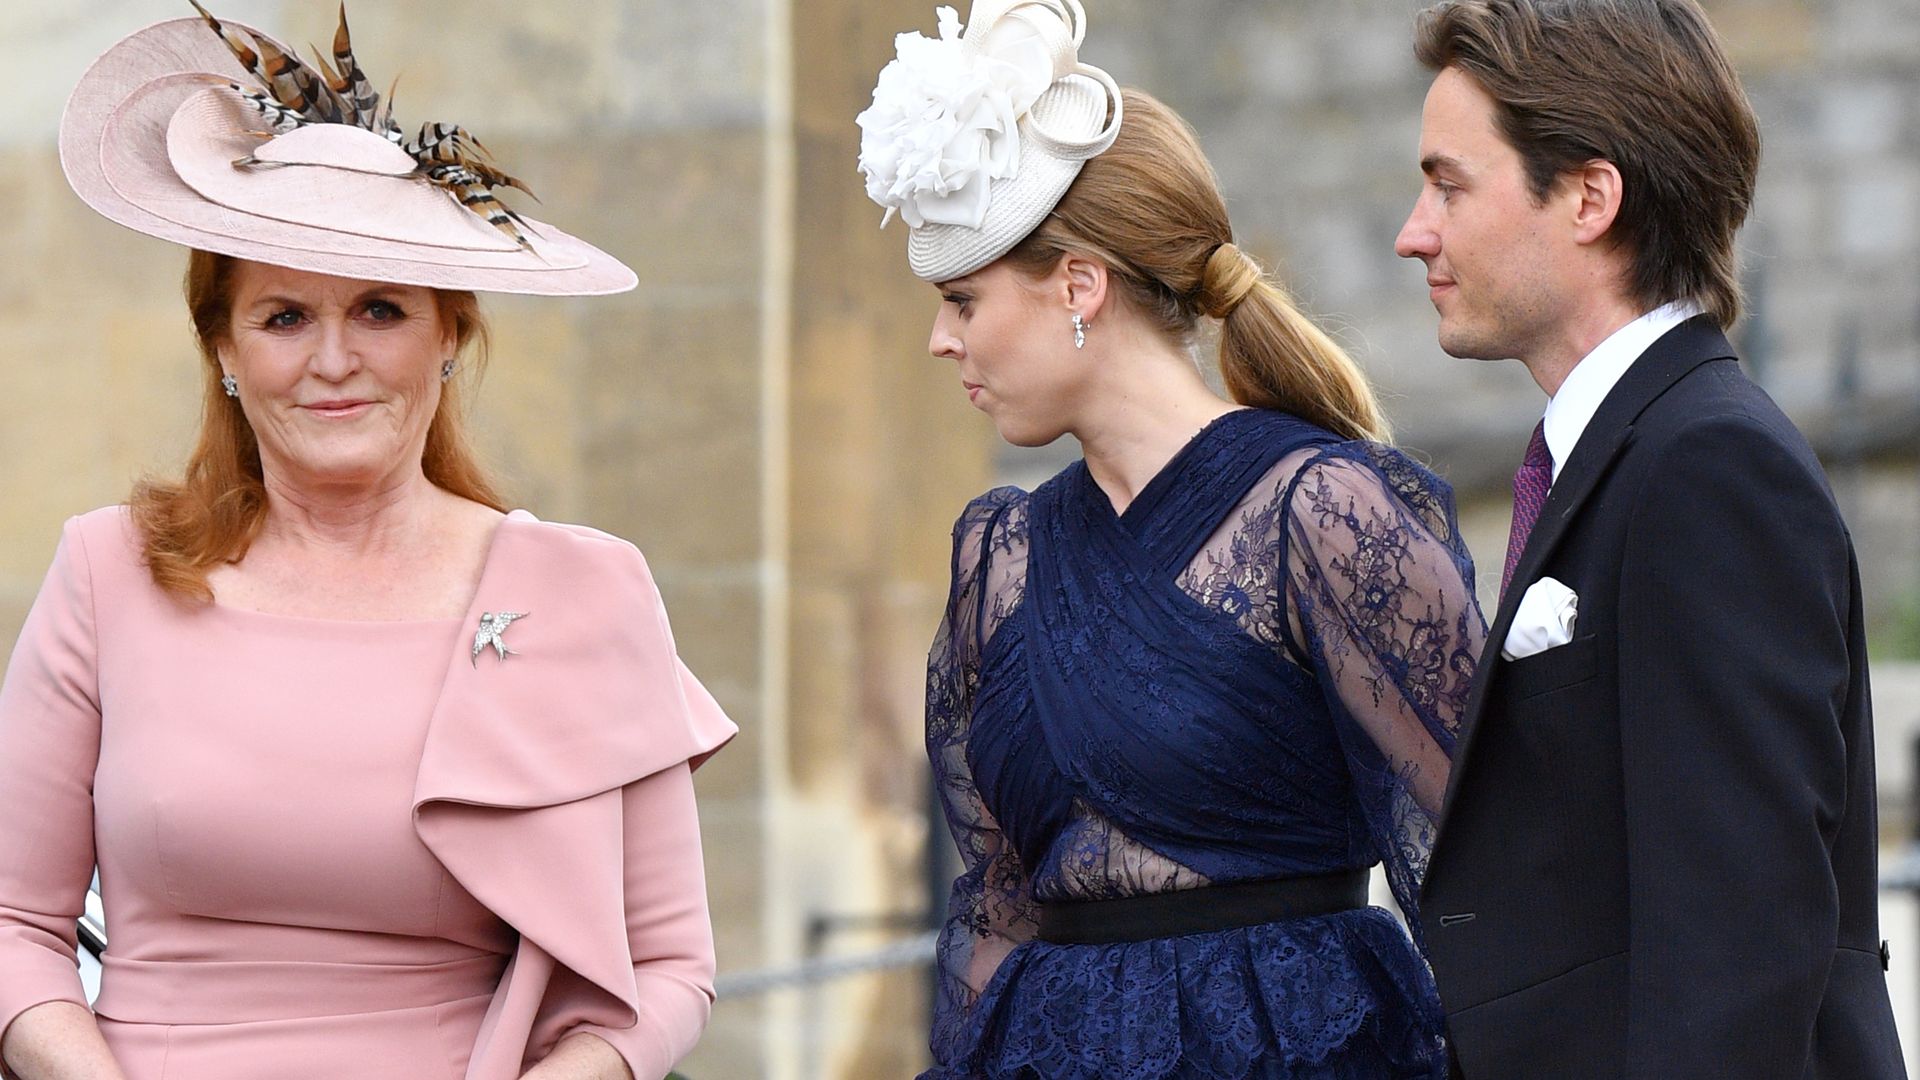 Princess Beatrice and childhood friend Edoardo Mapelli Mozzi's enduring bond with in-laws